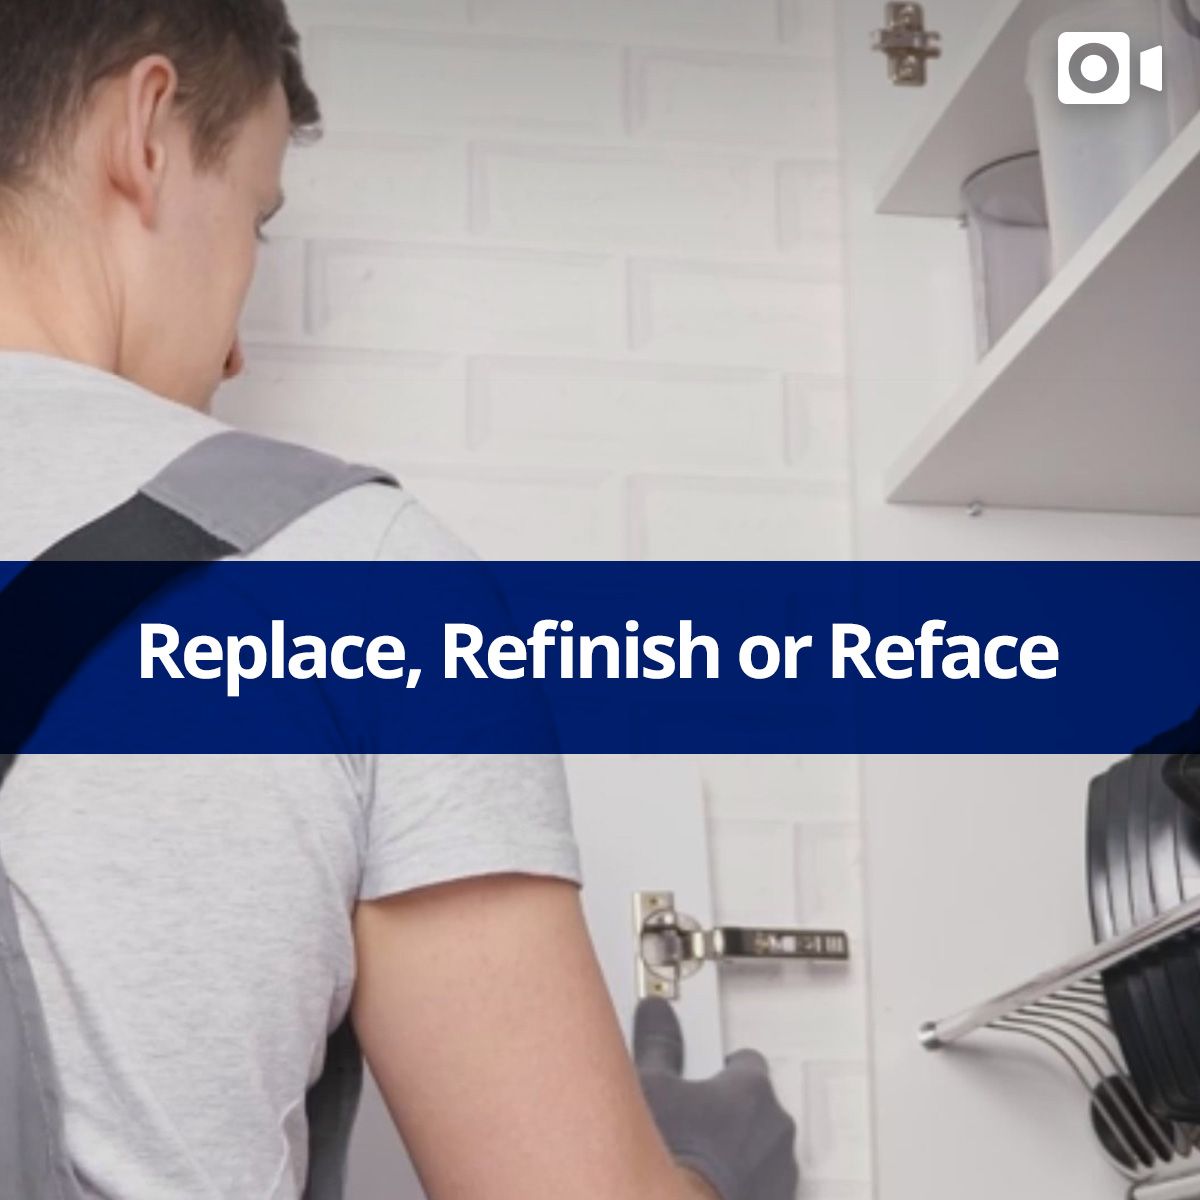 Replace, Refinish or Reface